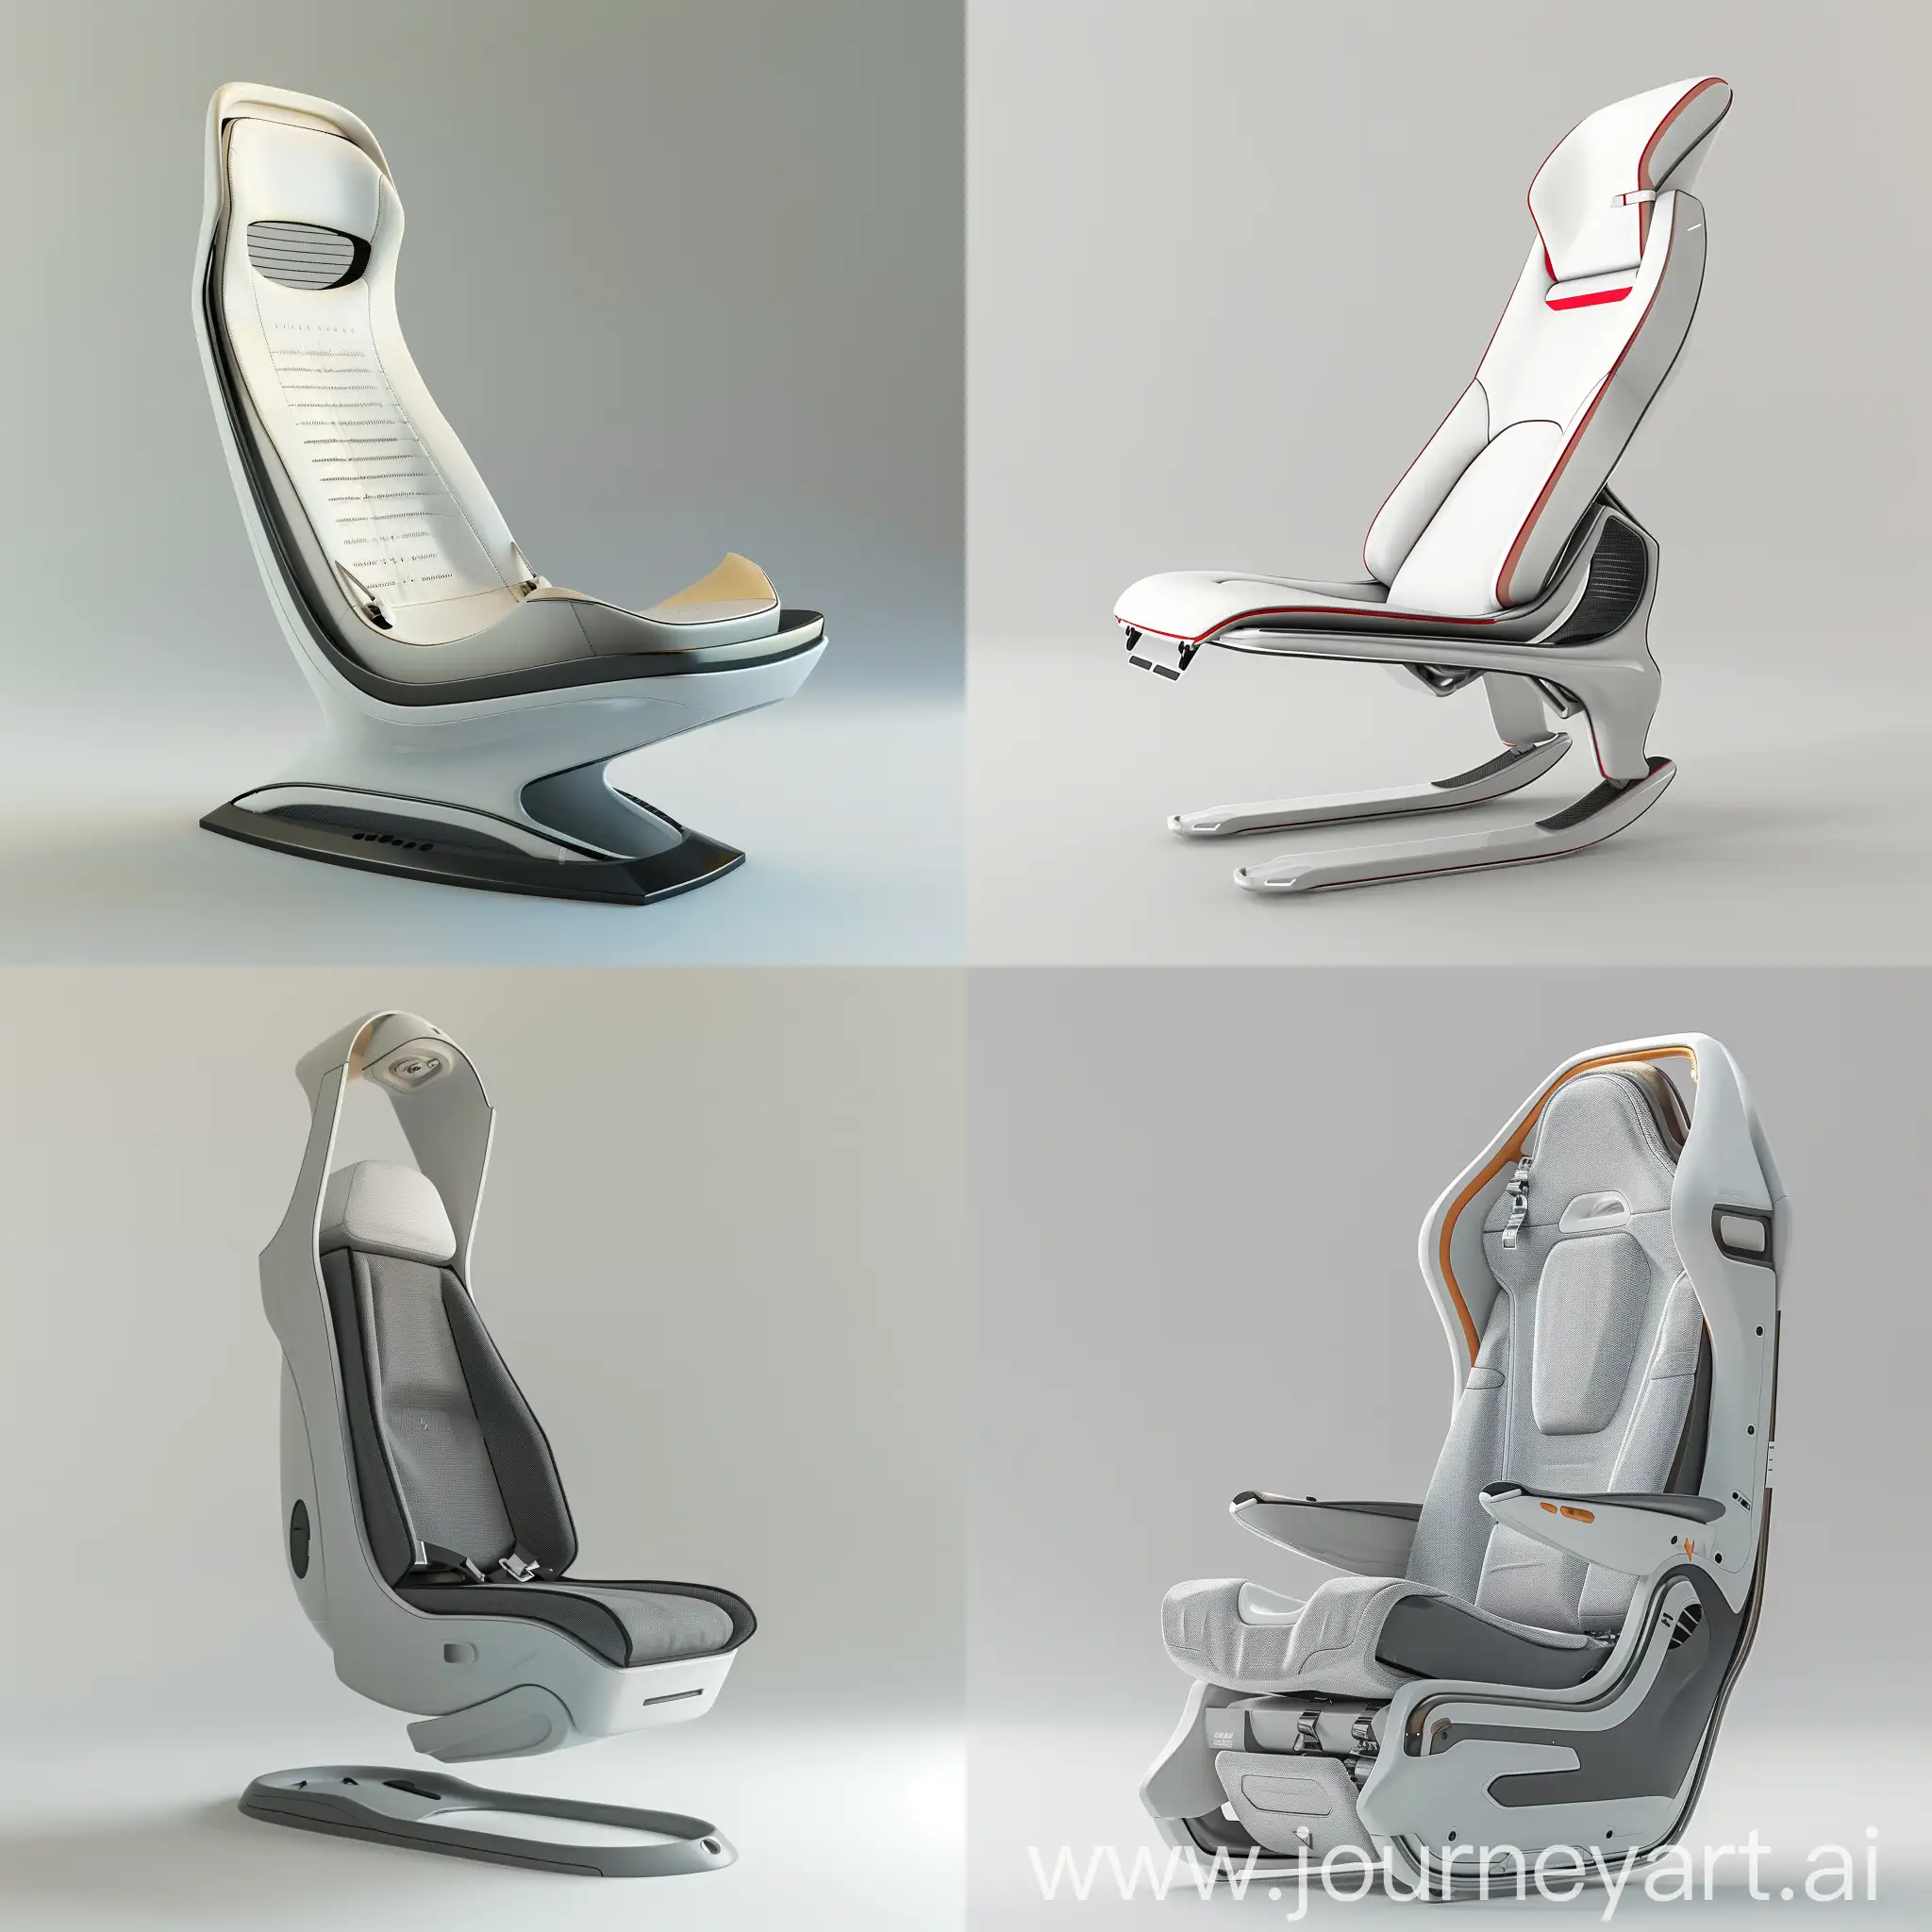 Sleek-and-Portable-Aircraft-Seat-Design-with-Realistic-Render